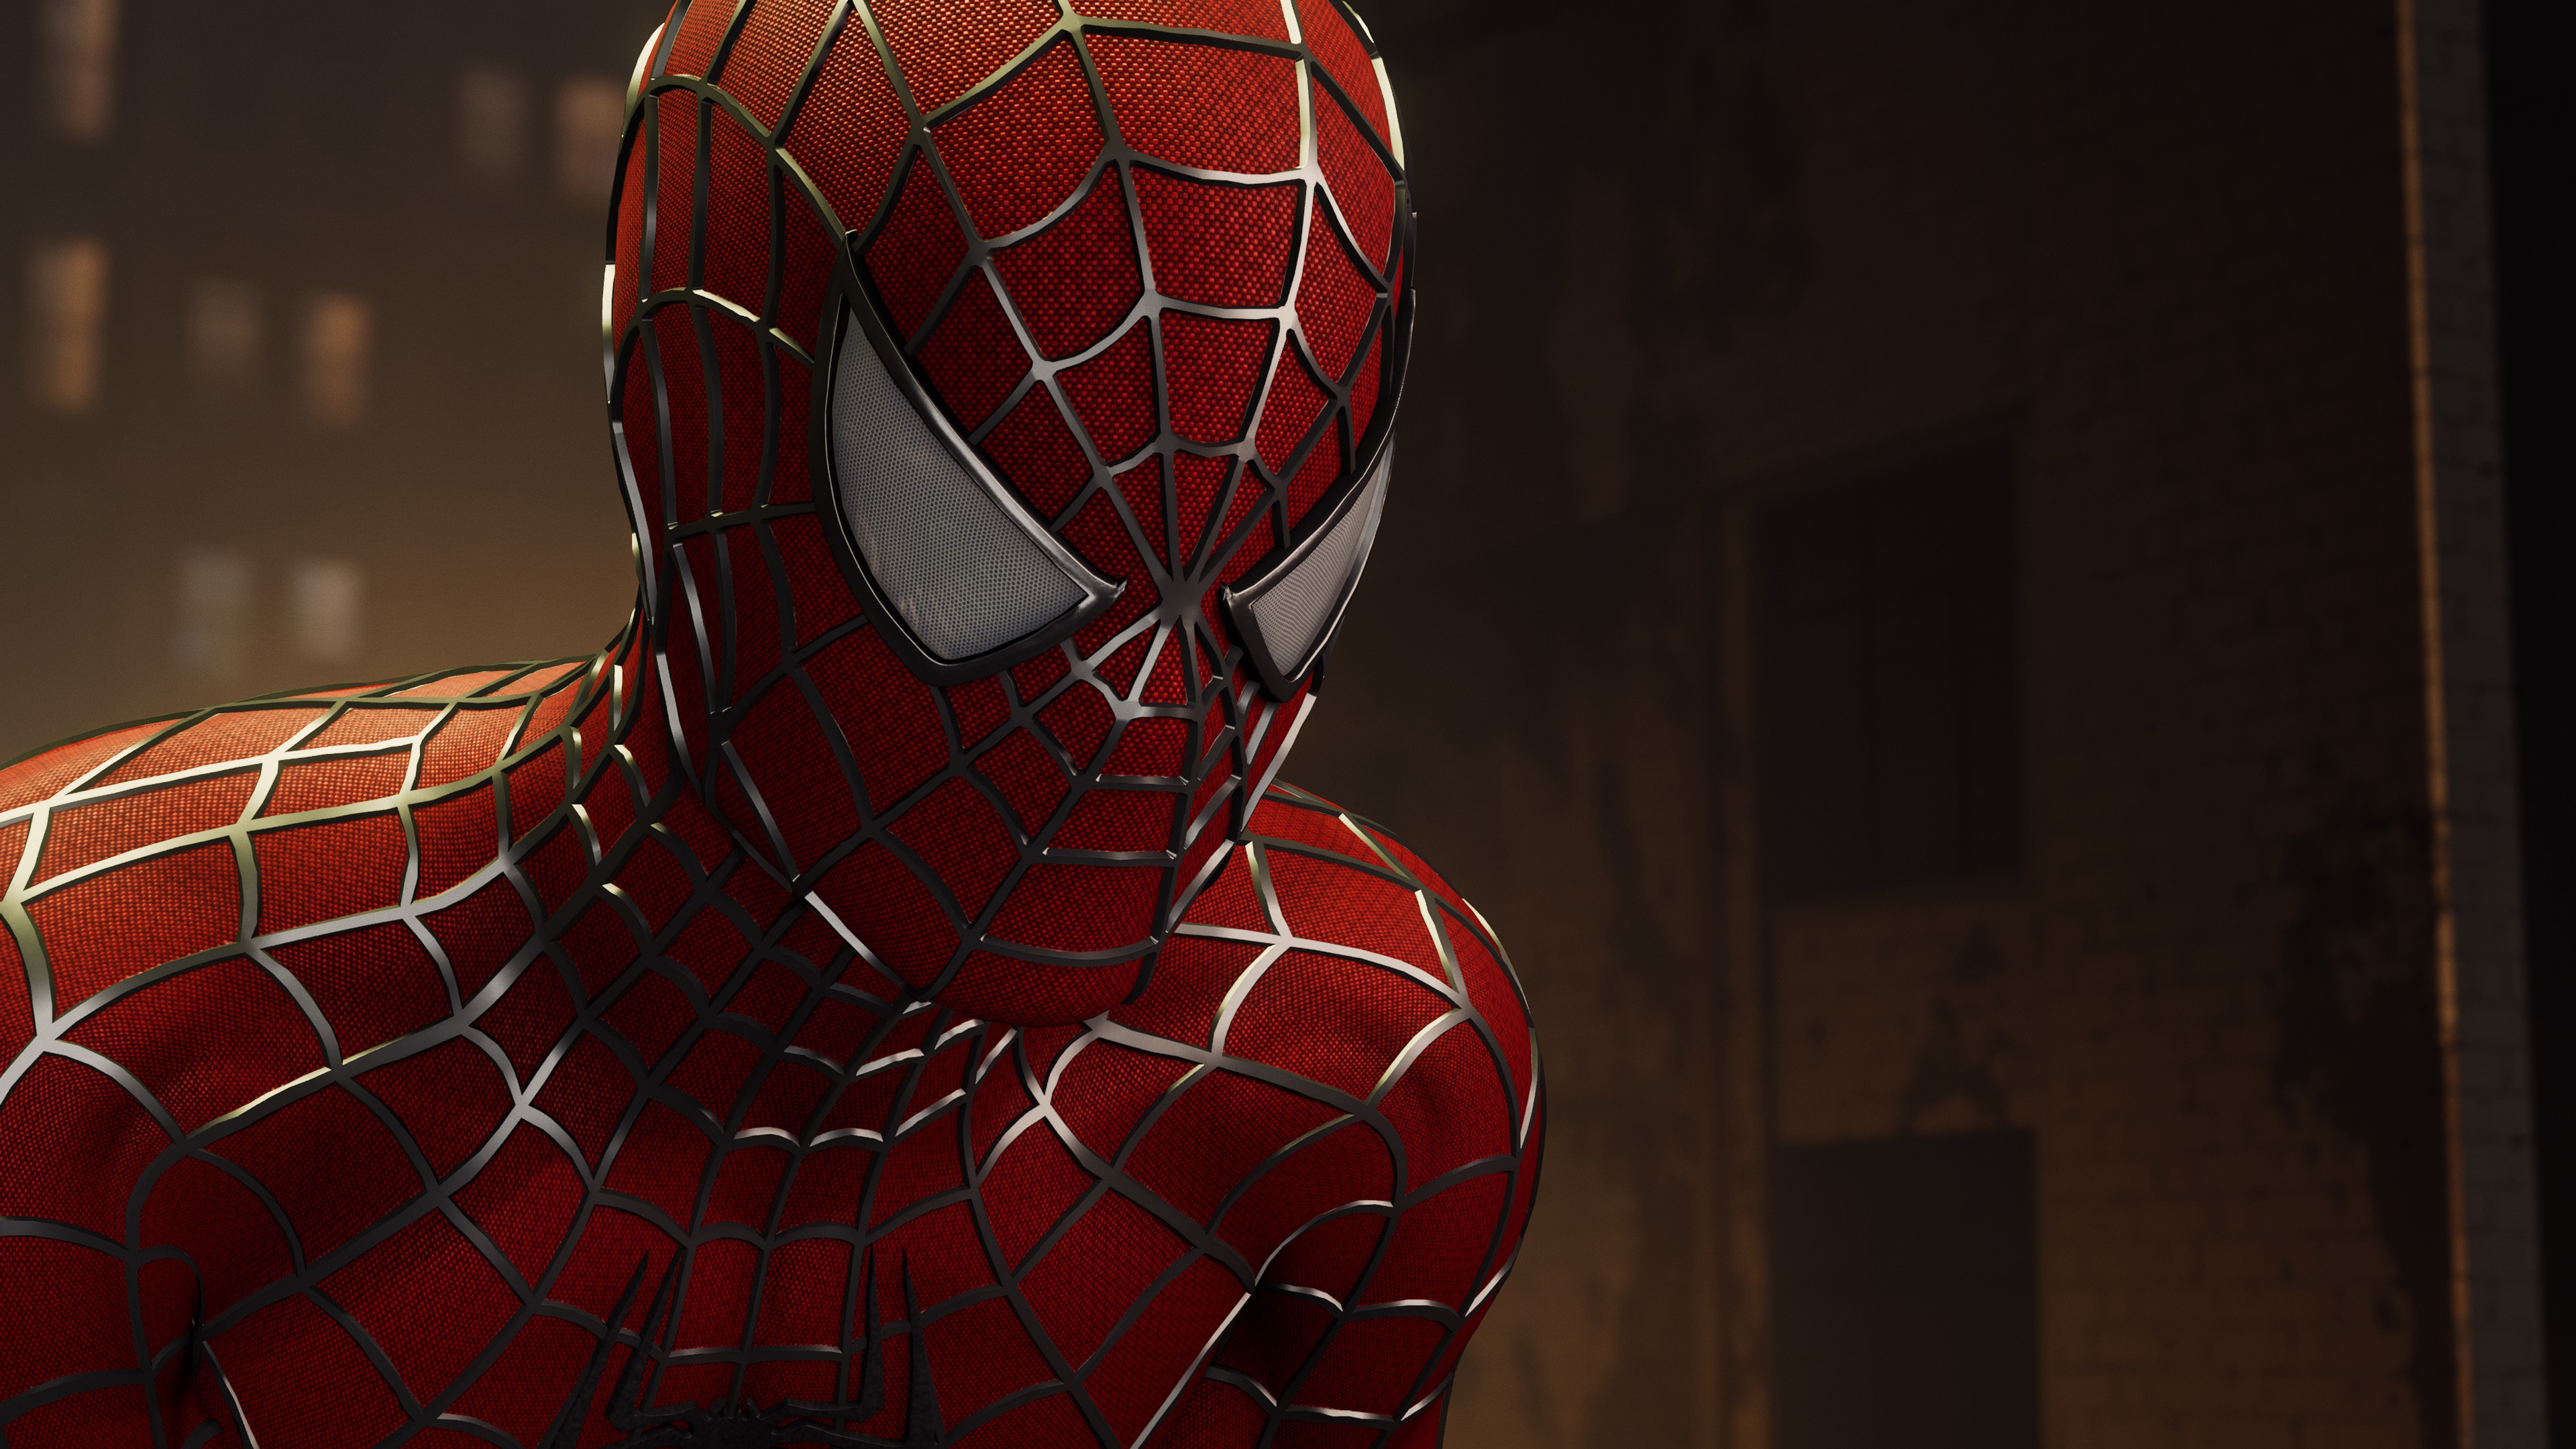 Spiderman 4k 2019, HD Games, 4k Wallpapers, Images, Backgrounds, Photos